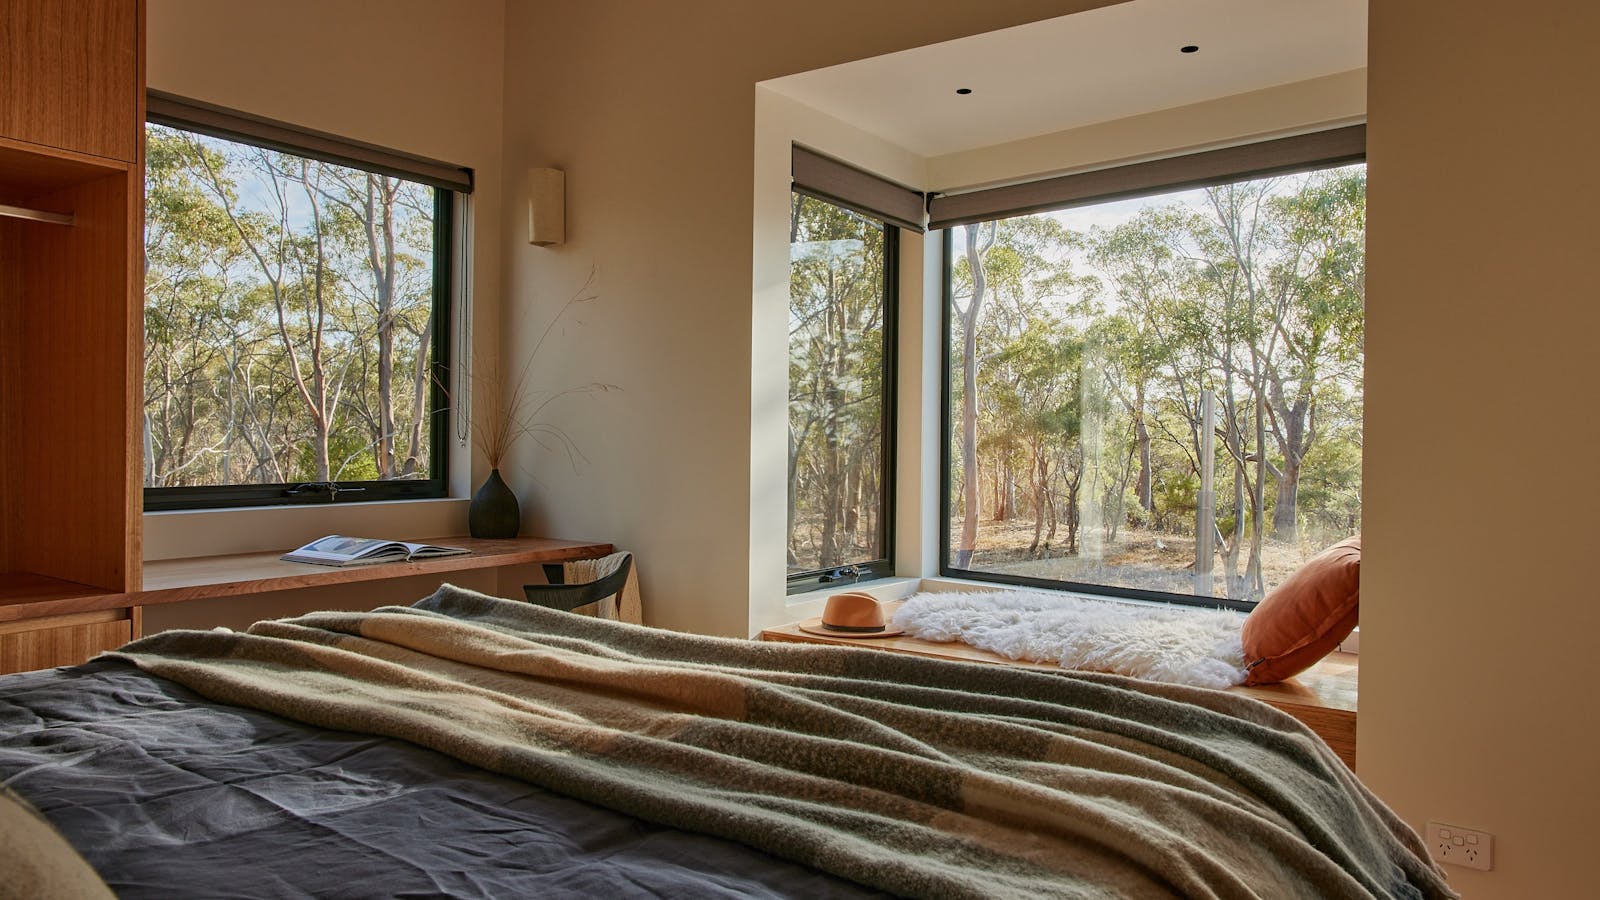 The main bedroom features a king size bed with a bush outlook